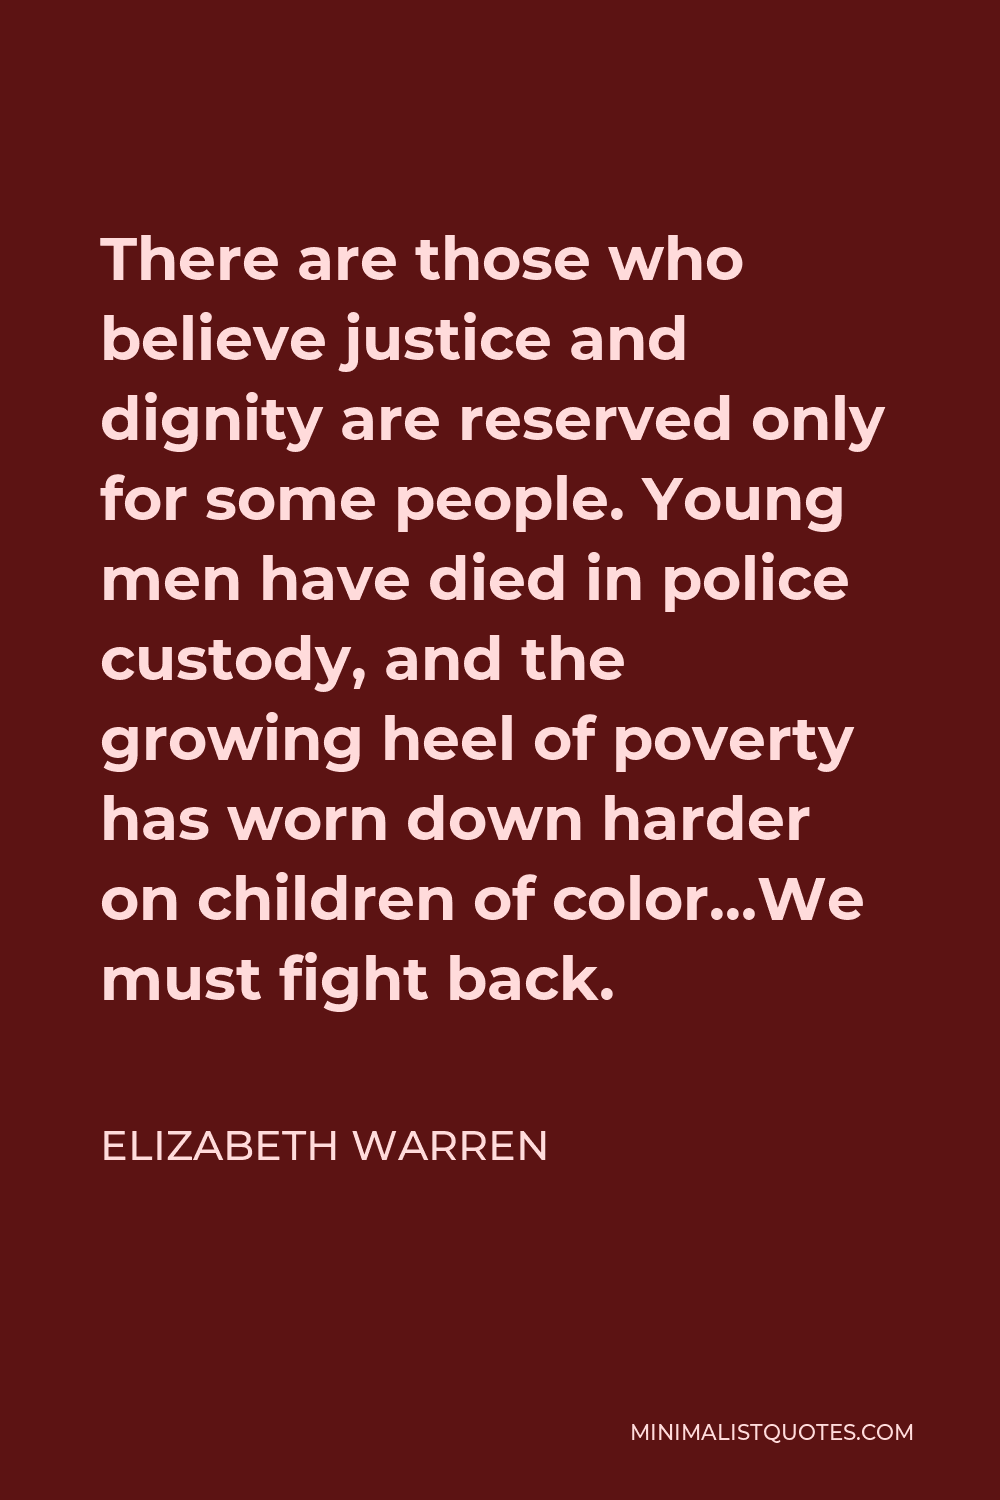 Elizabeth Warren Quote - There are those who believe justice and dignity are reserved only for some people. Young men have died in police custody, and the growing heel of poverty has worn down harder on children of color…We must fight back.